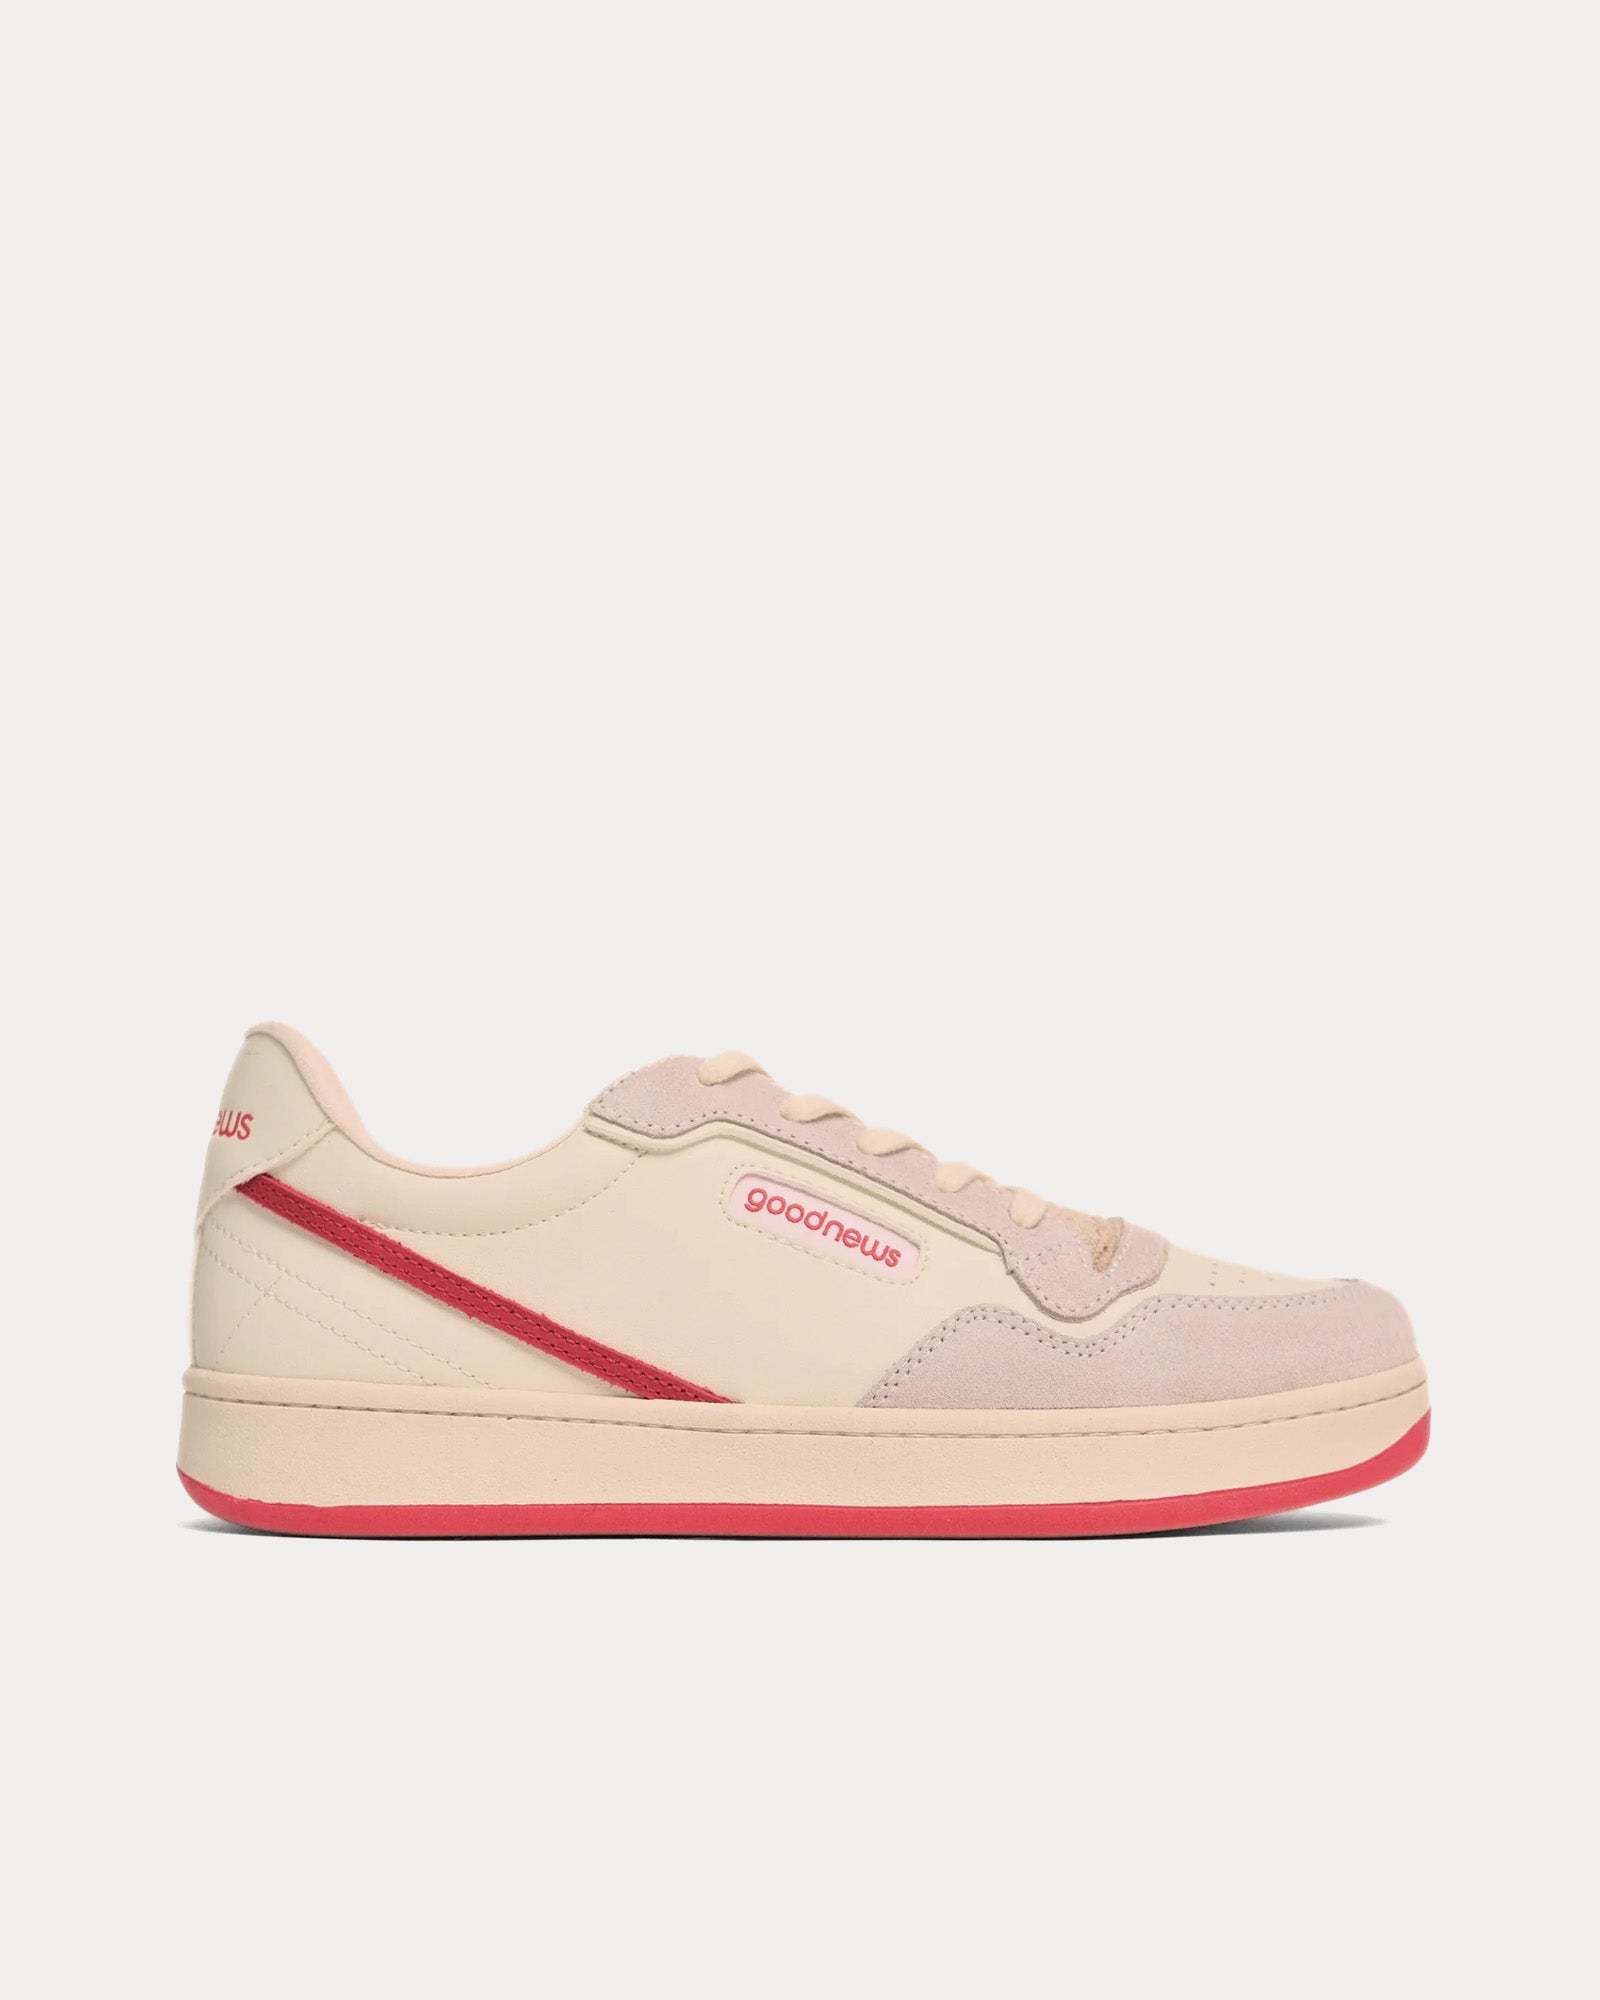 Good News - Mack White / Red Low Top Sneakers